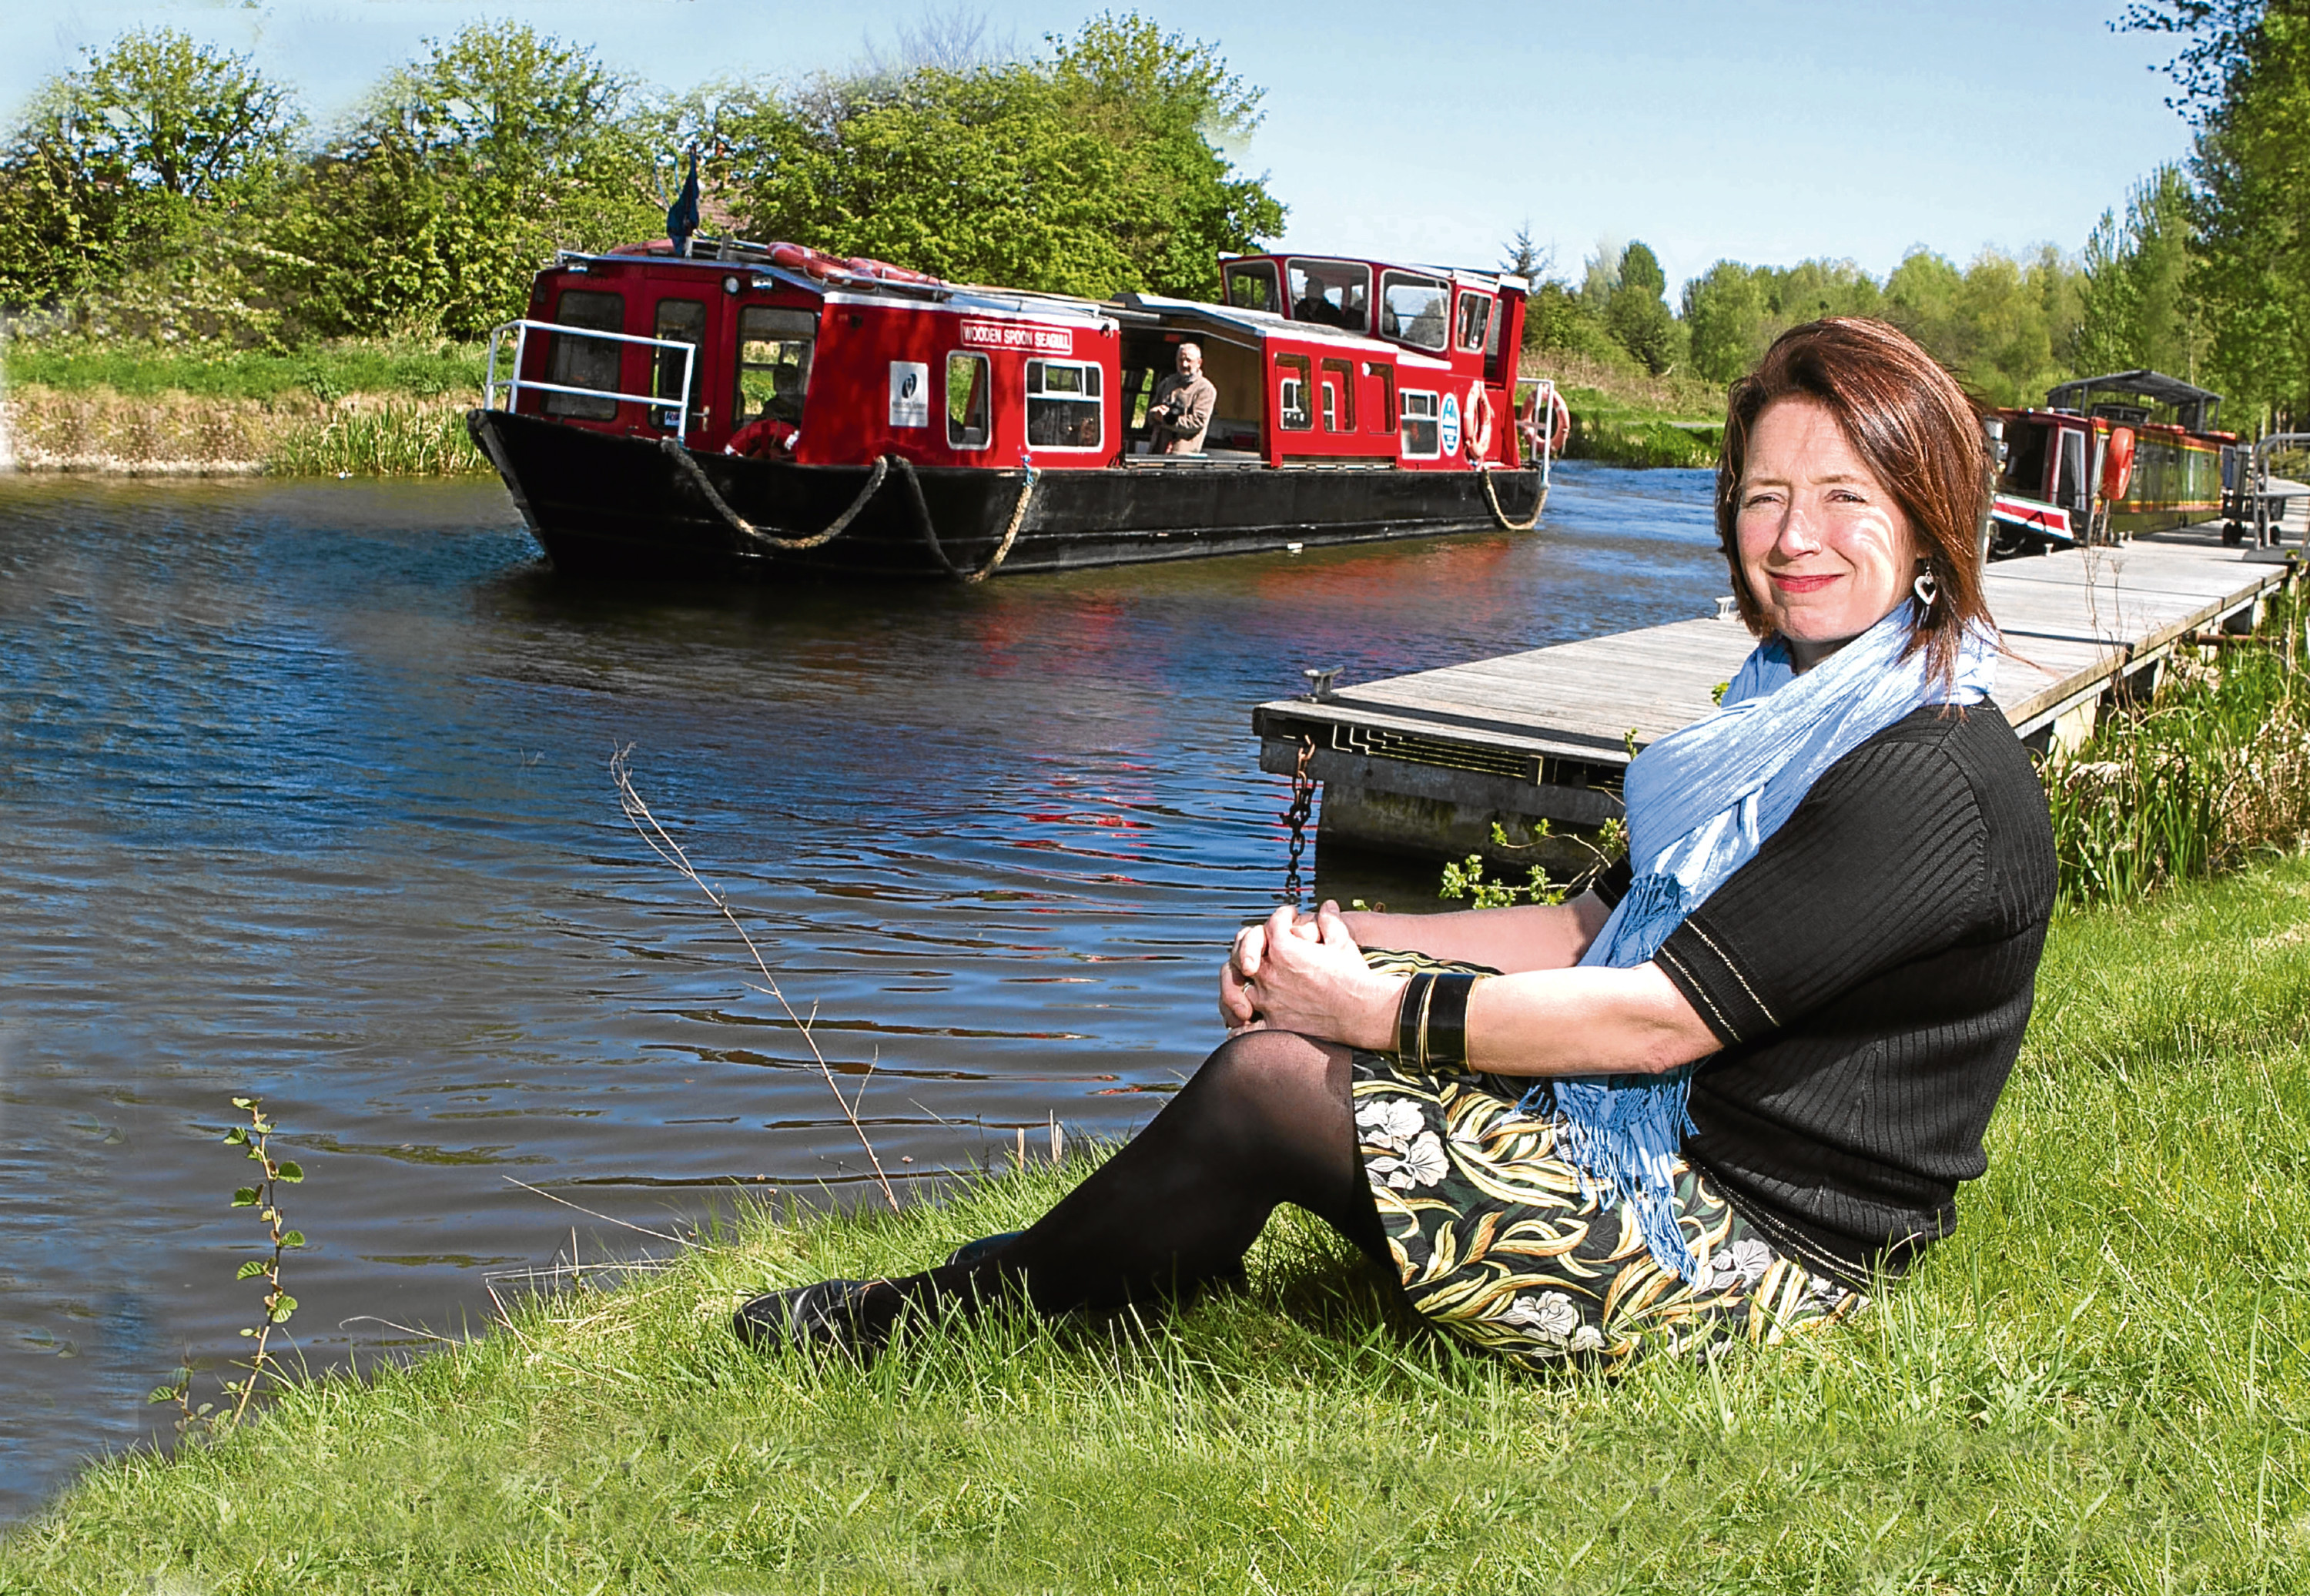 Artist Lesley Banks has been Scottish Canals' resident artist and has a show called Gongoozler at Callender House in Falkirk (Chris Austin / DC Thomson)